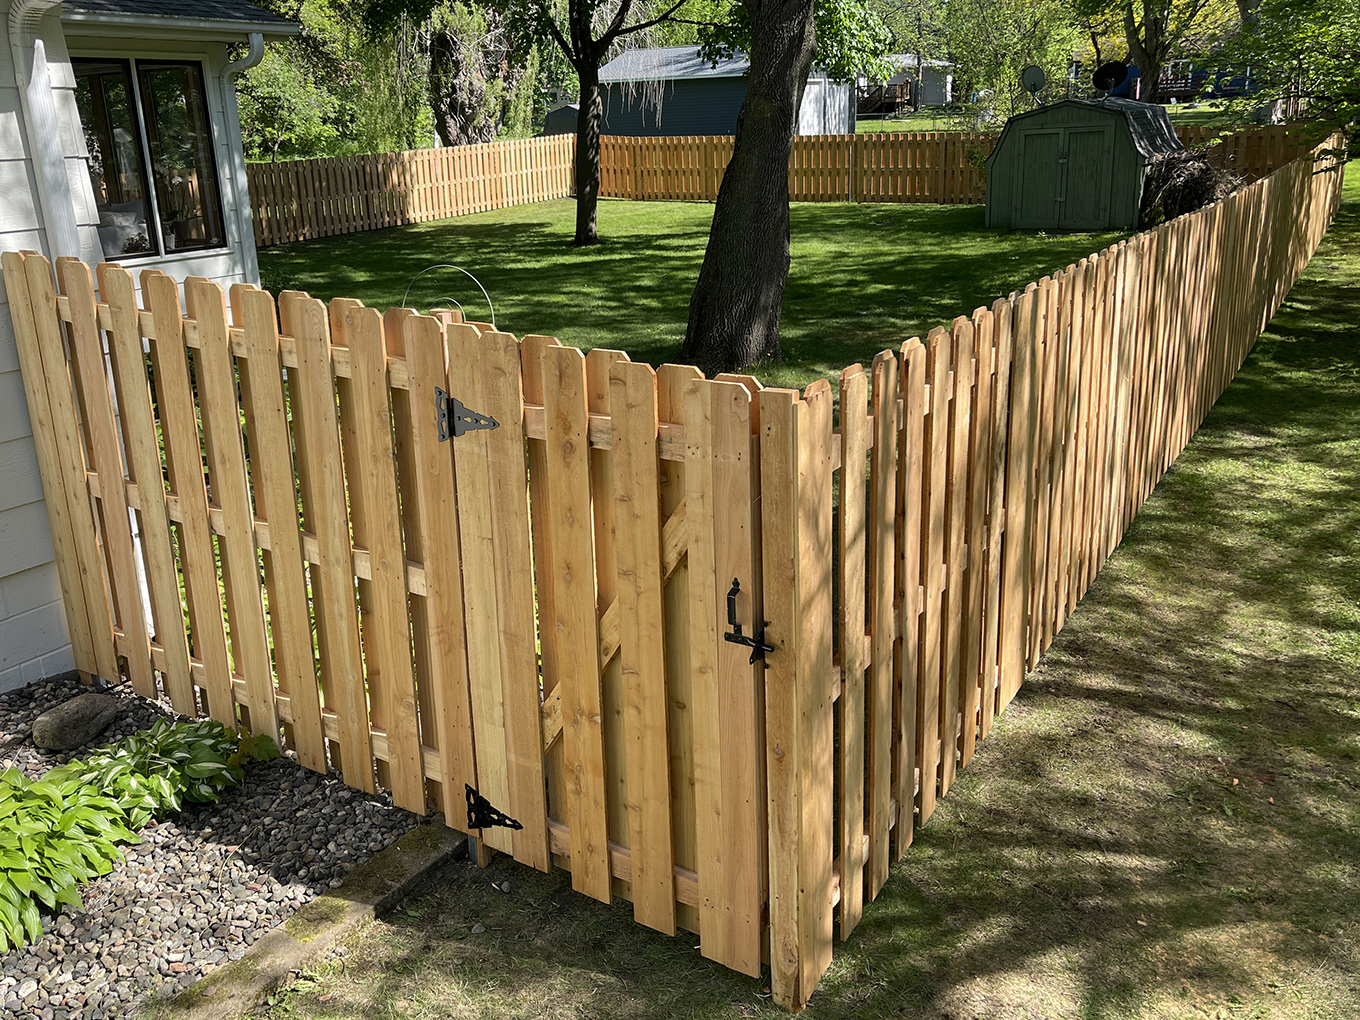 Victoria Minnesota residential and commercial fencing